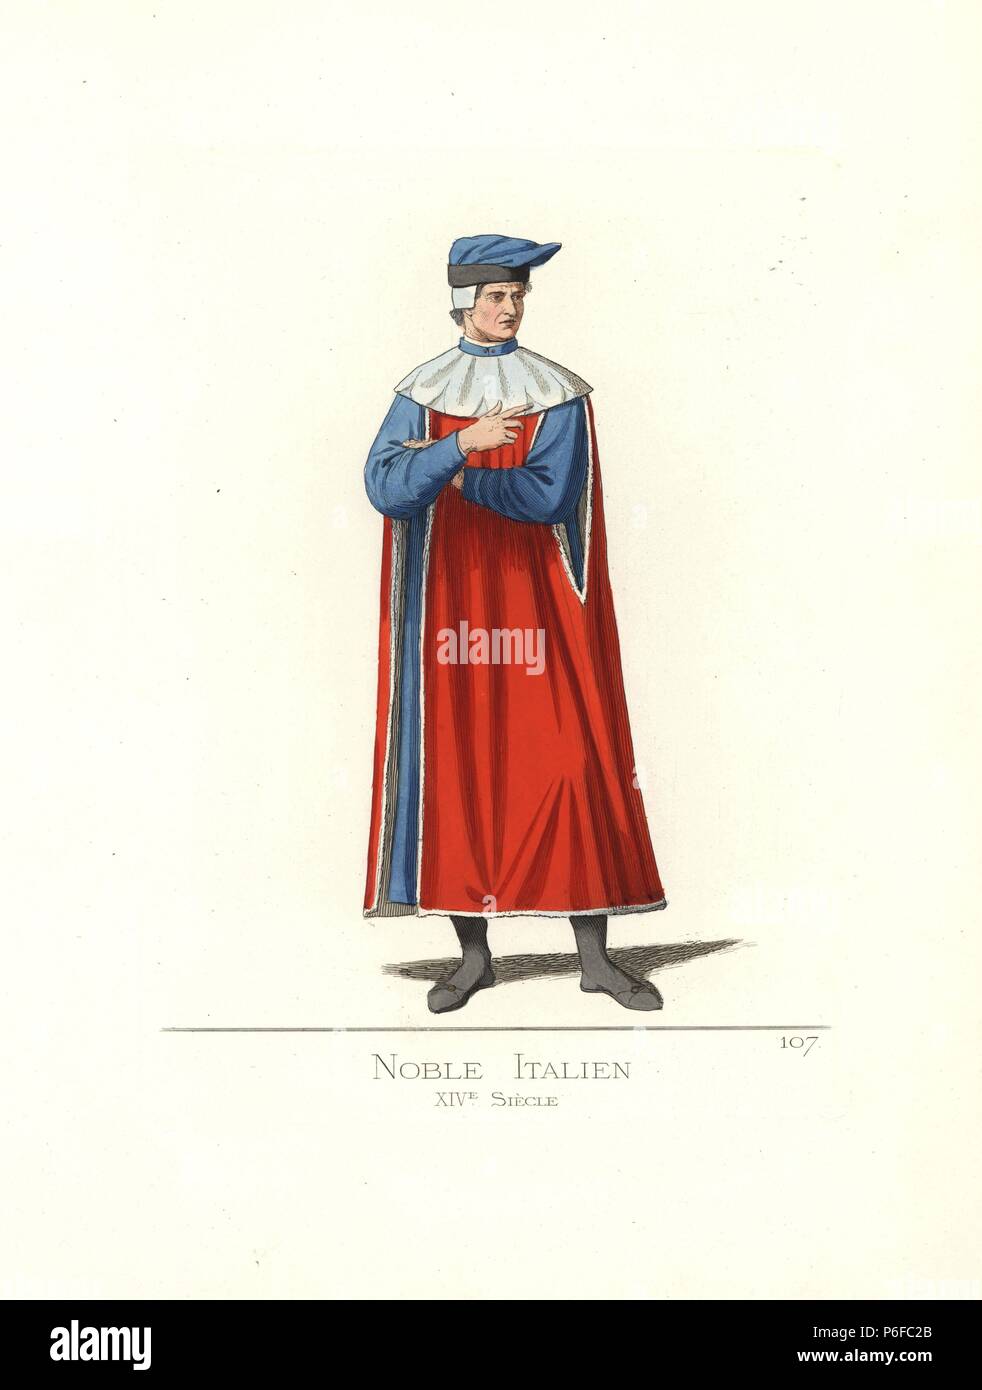 Costume of an Italian nobleman, 14th century. He wears a blue bonnet, a red  cape with white collar trimmed with ermine over a blue robe. From a  miniature in a 14th century